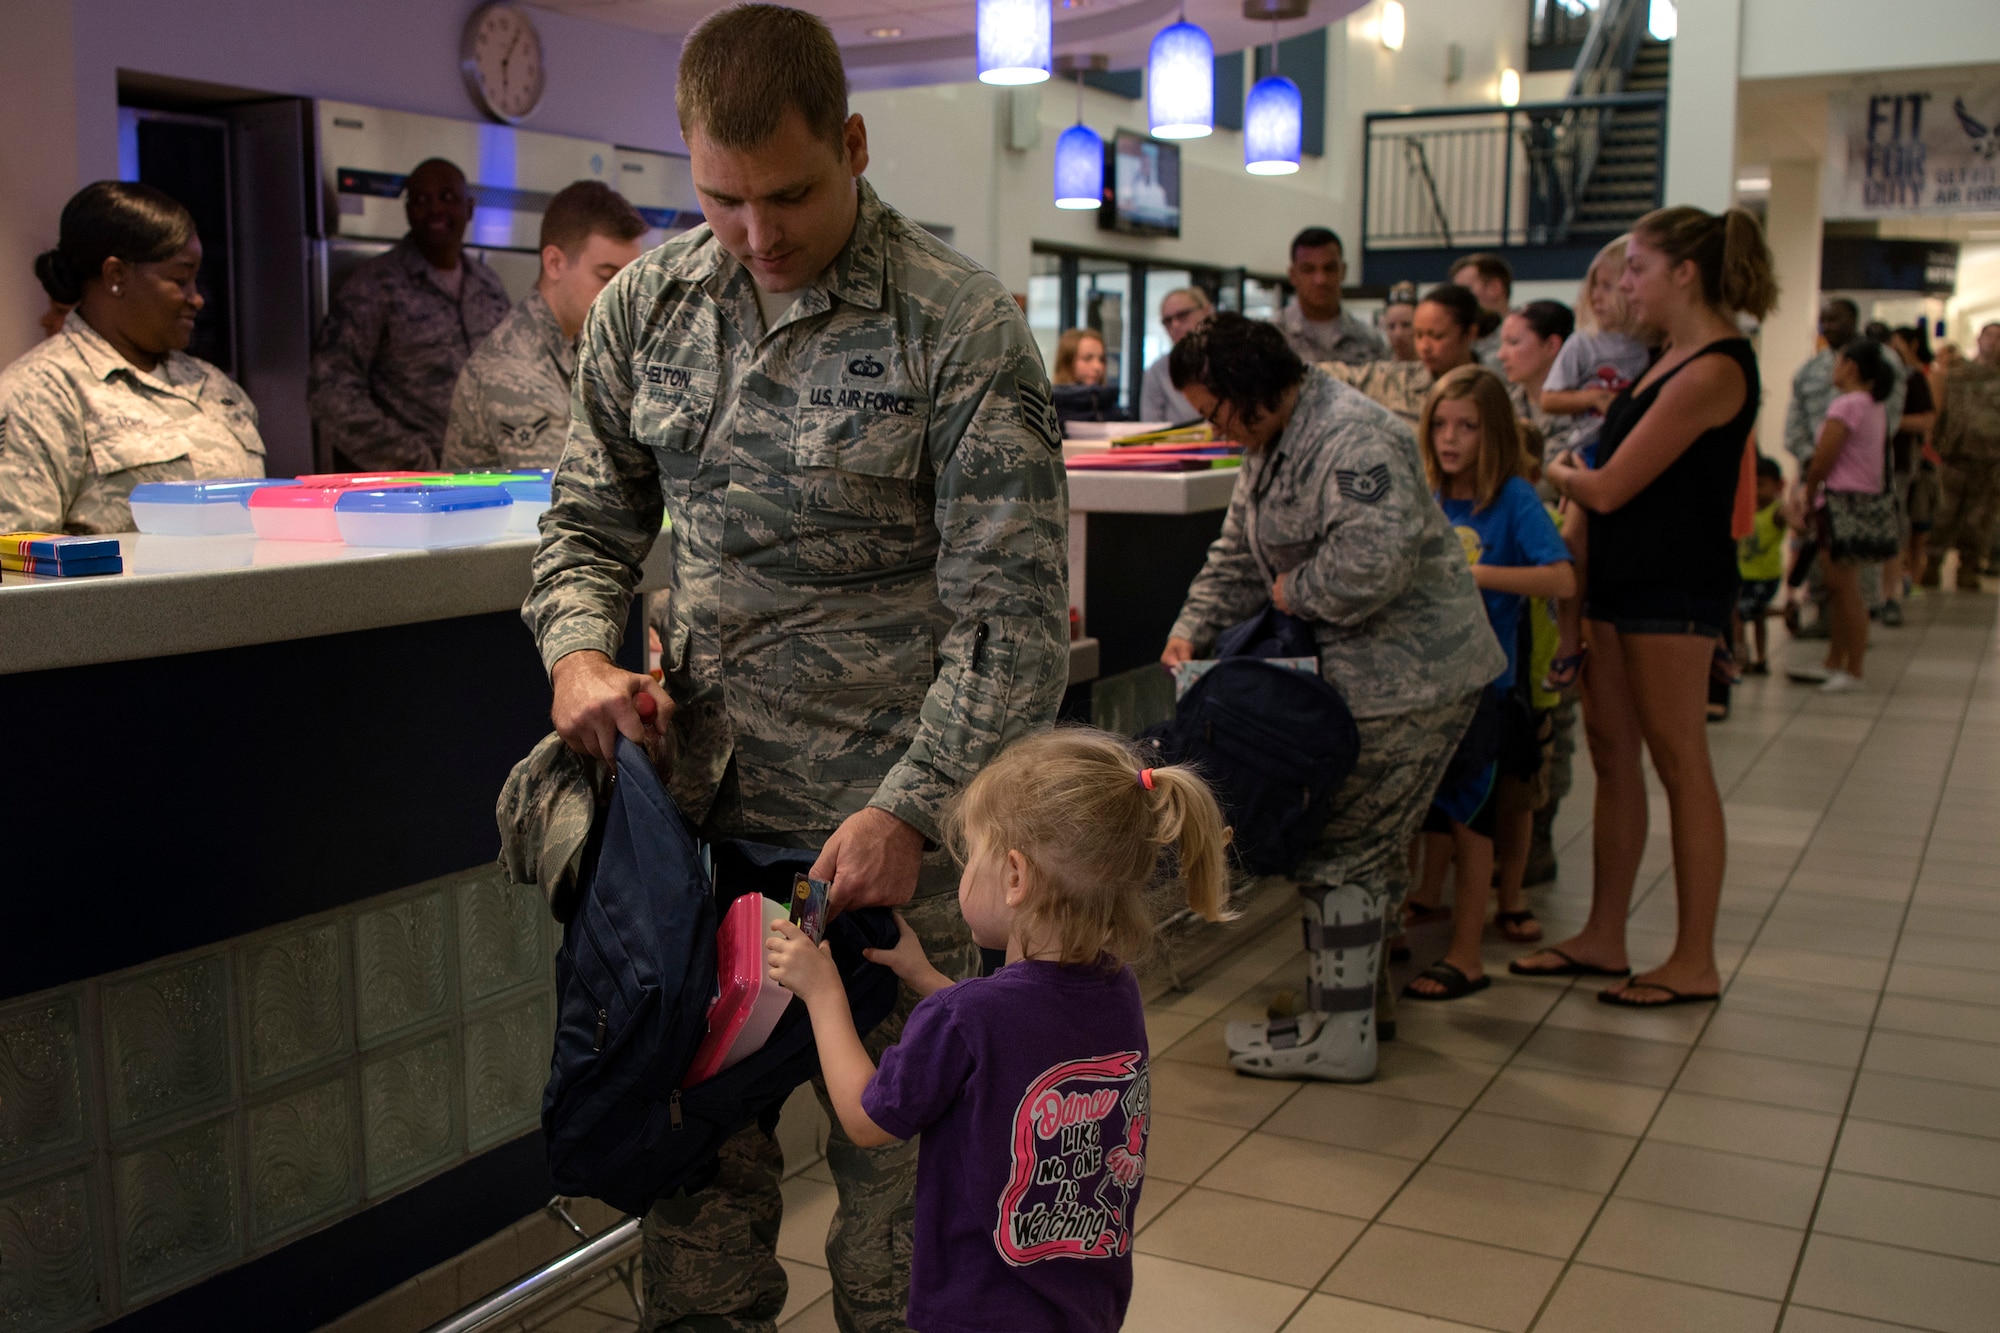 An Airman helps his daughter fill her backpack with supplies at the Back-To-School Brigade, July 25, 2018, at Moody Air Force Base, Ga. With the help of Operation Homefront and the local community, the event provided Moody Airmen, grades E-1 through E-6, with school supplies. (U.S. Air Force photo by Airman Taryn Butler)